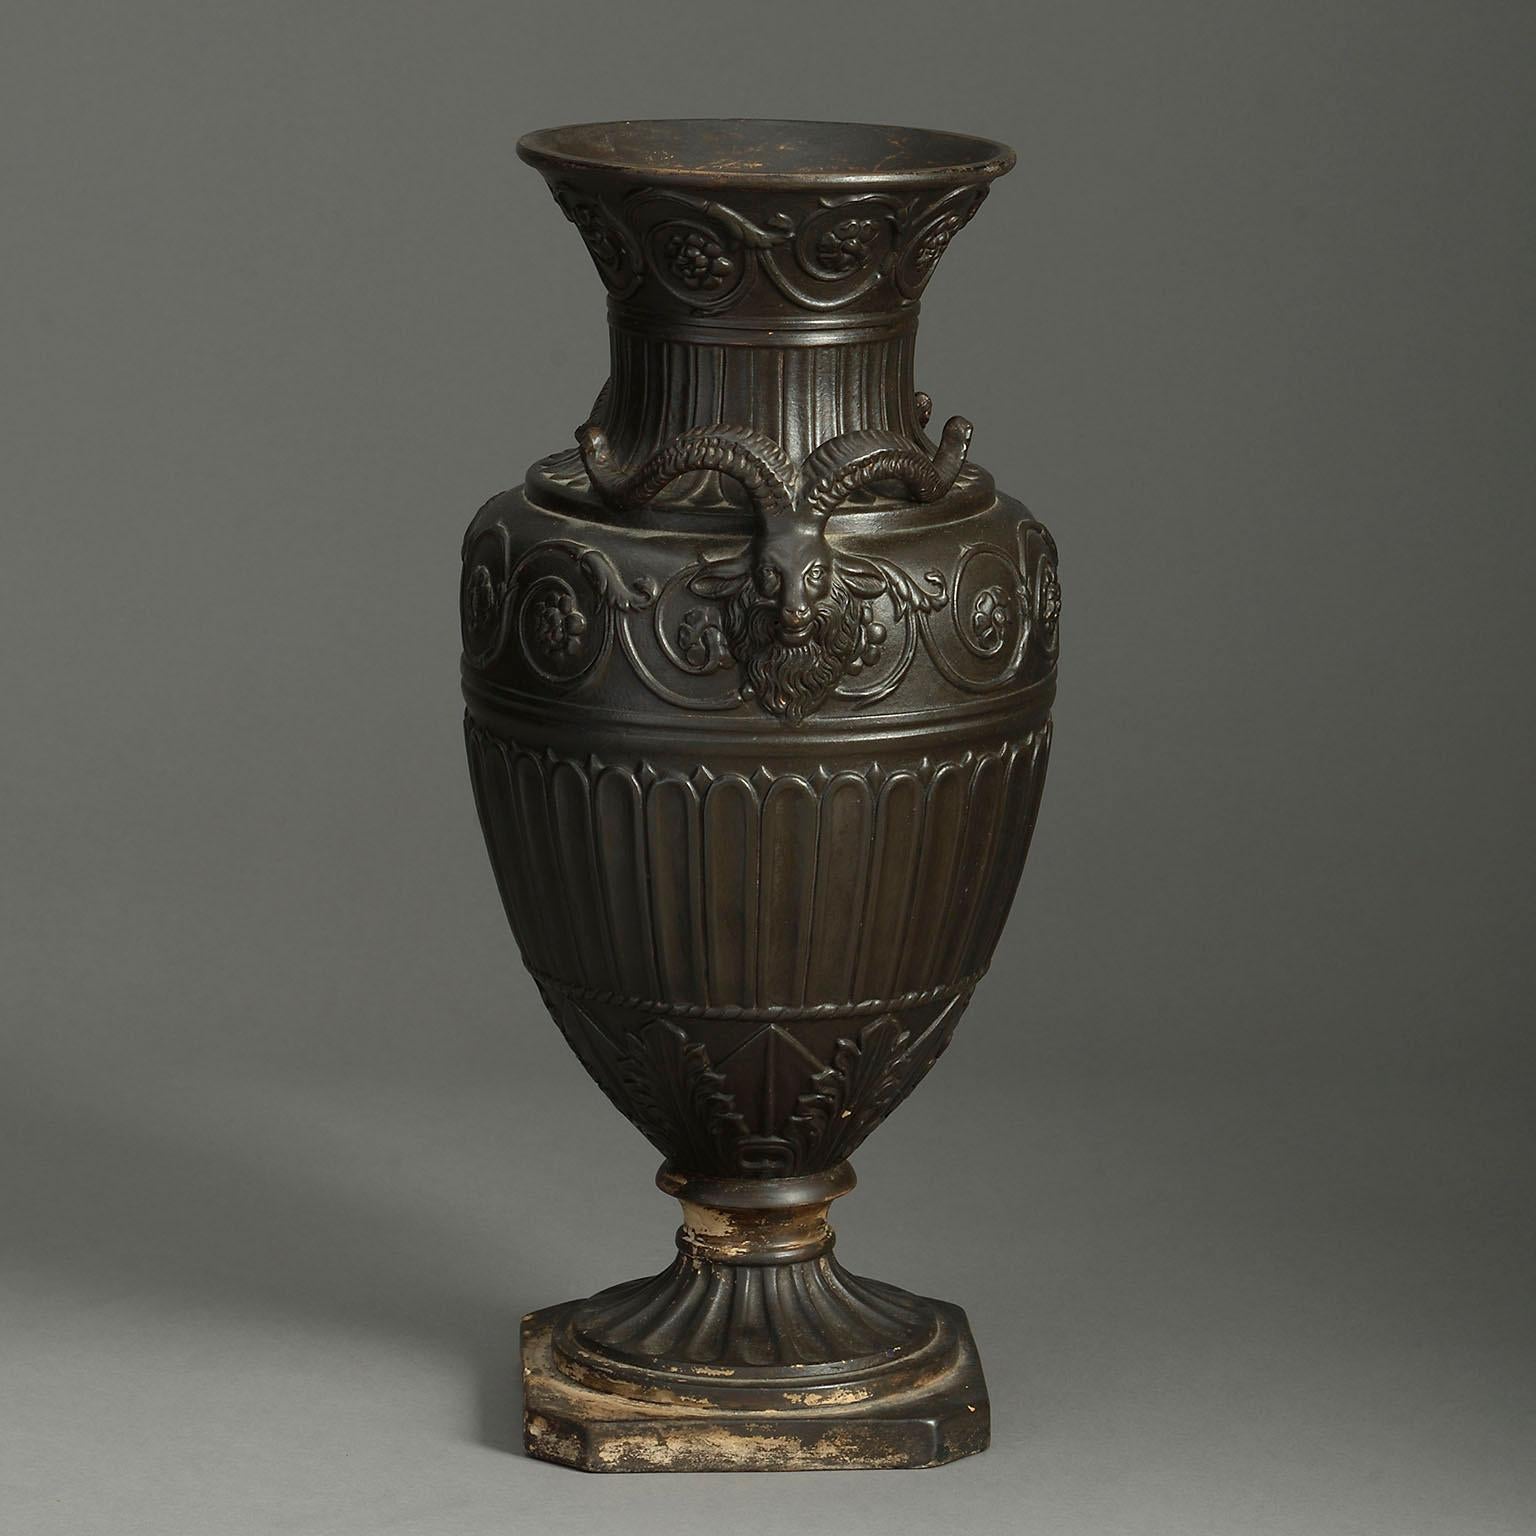 A mid-nineteenth century terracotta urn in the Classical taste, the neck with scrolling floral work above a palmette frieze, with applied rams head handles, the body having repeated floral scrollwork upon fluting and palmette and acanthus